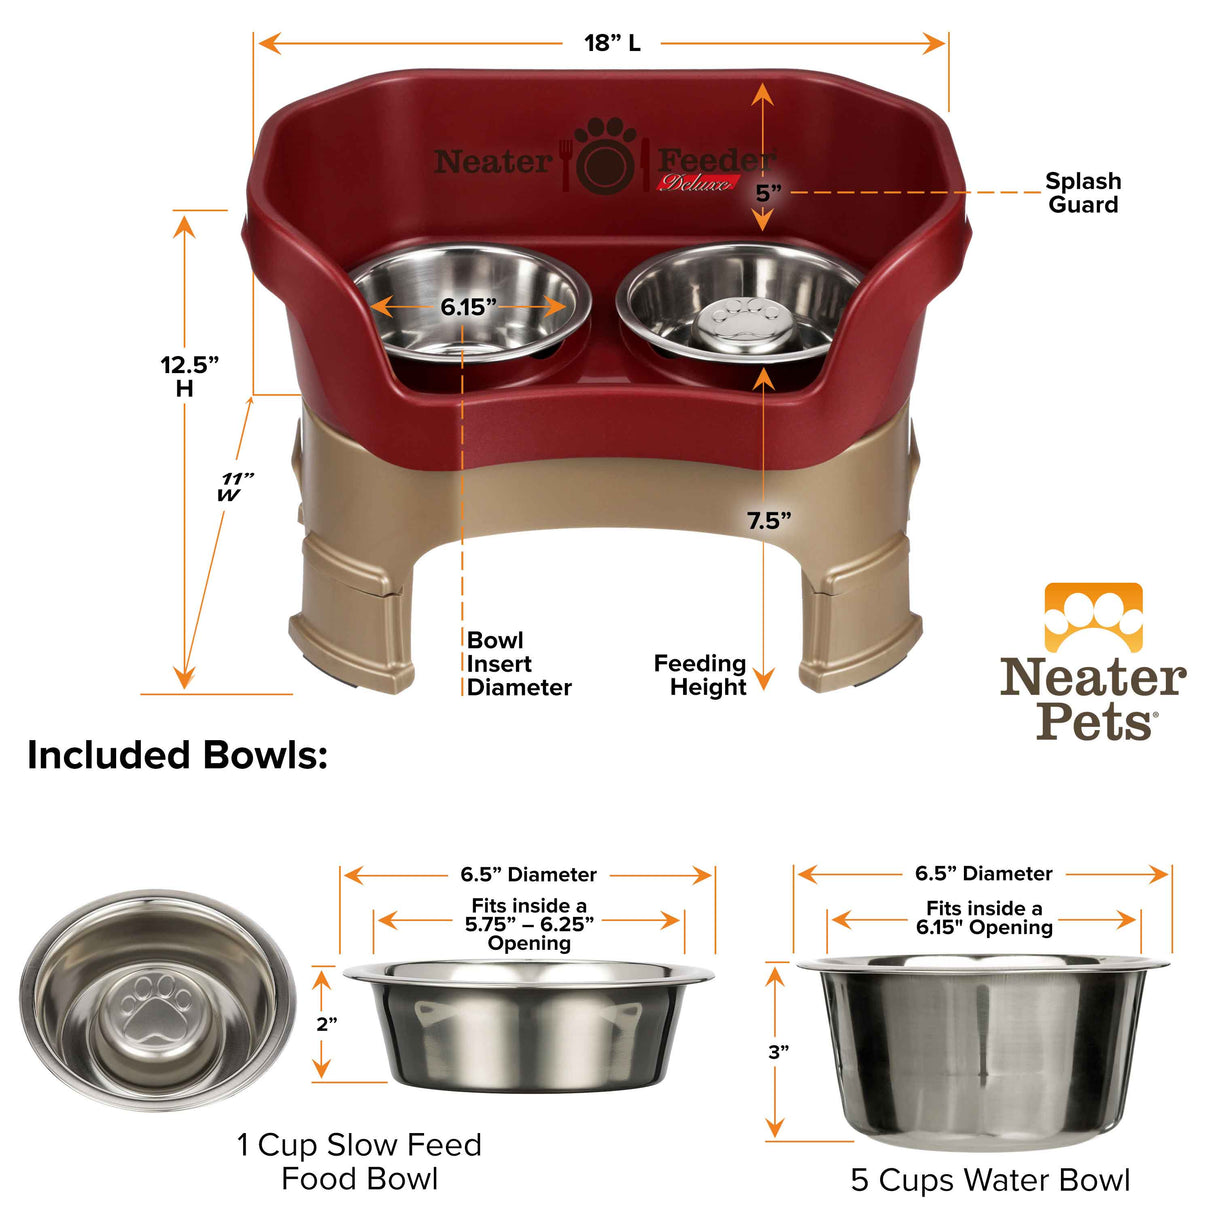 Dimensions of Cranberry medium DELUXE Neater Feeder with Stainless Steel Slow Feed Bowl with leg extensions